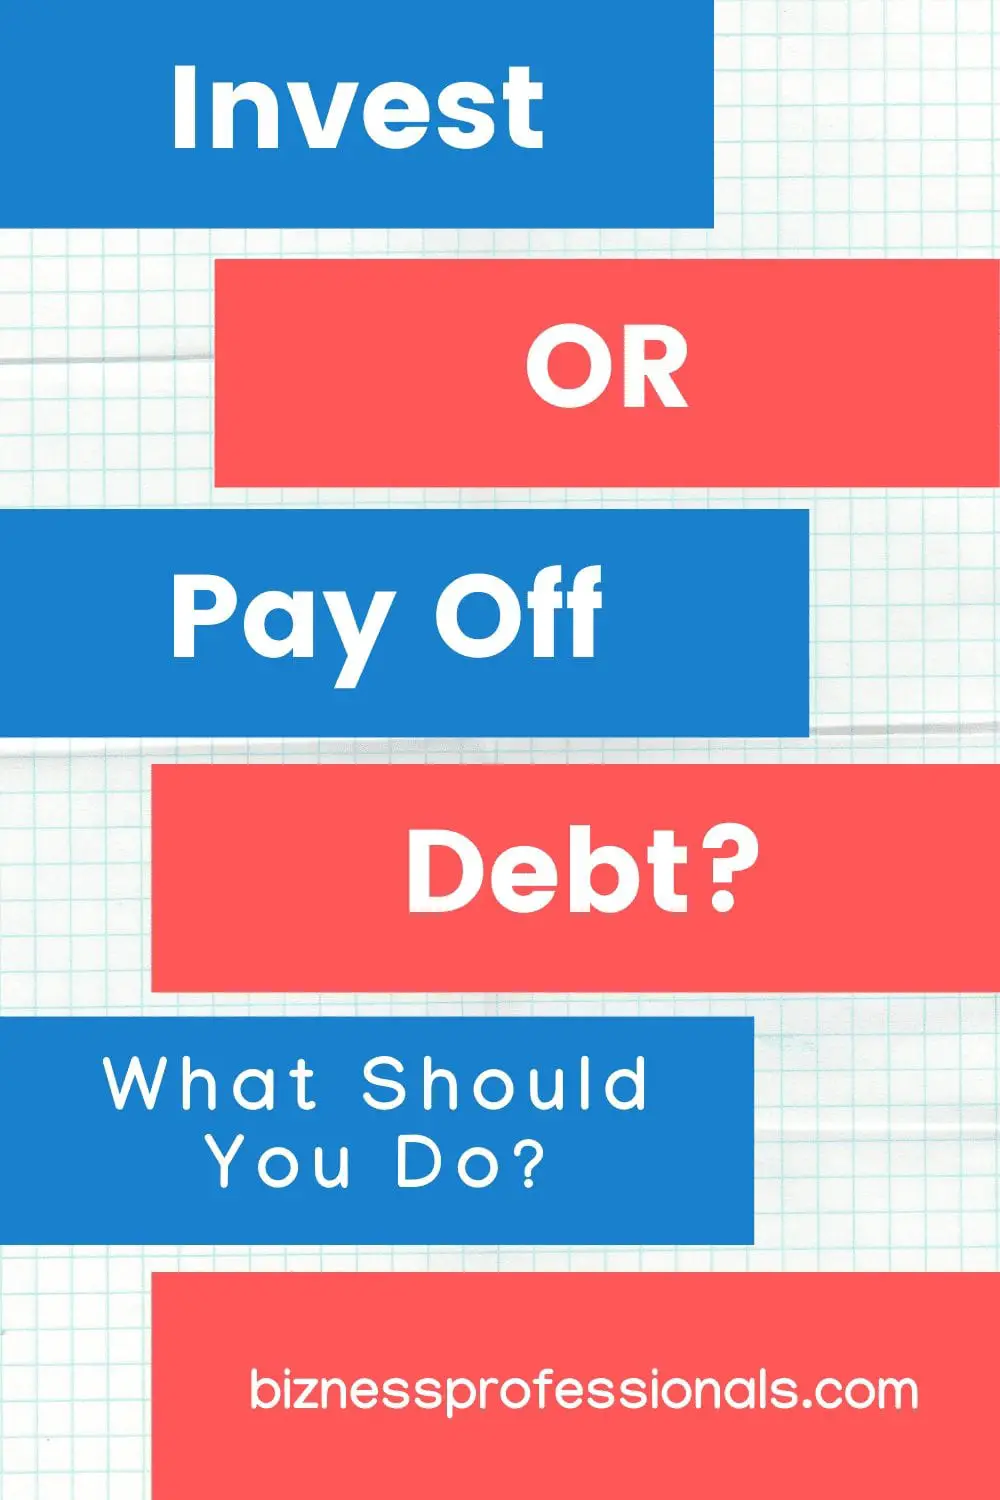 should you invest or pay off debt